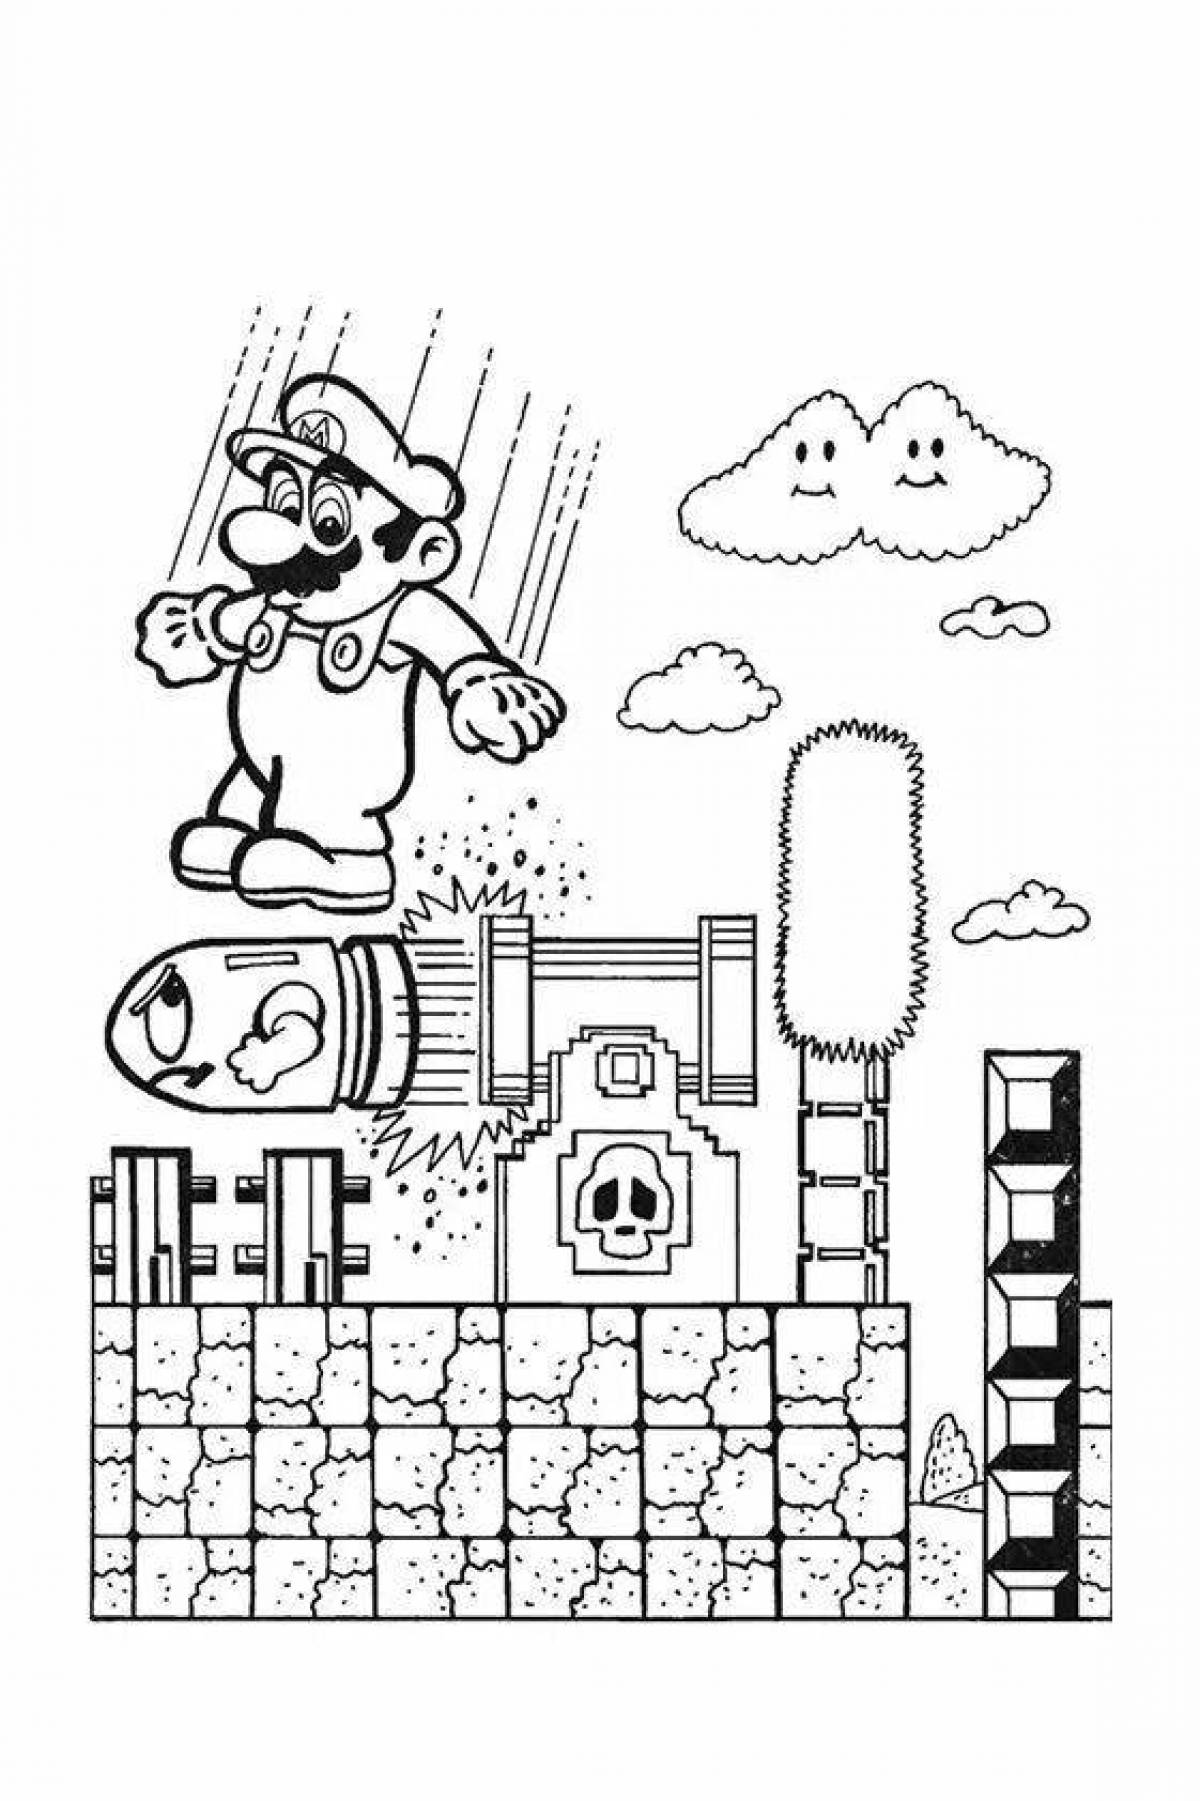 Lego mario coloring book filled with color